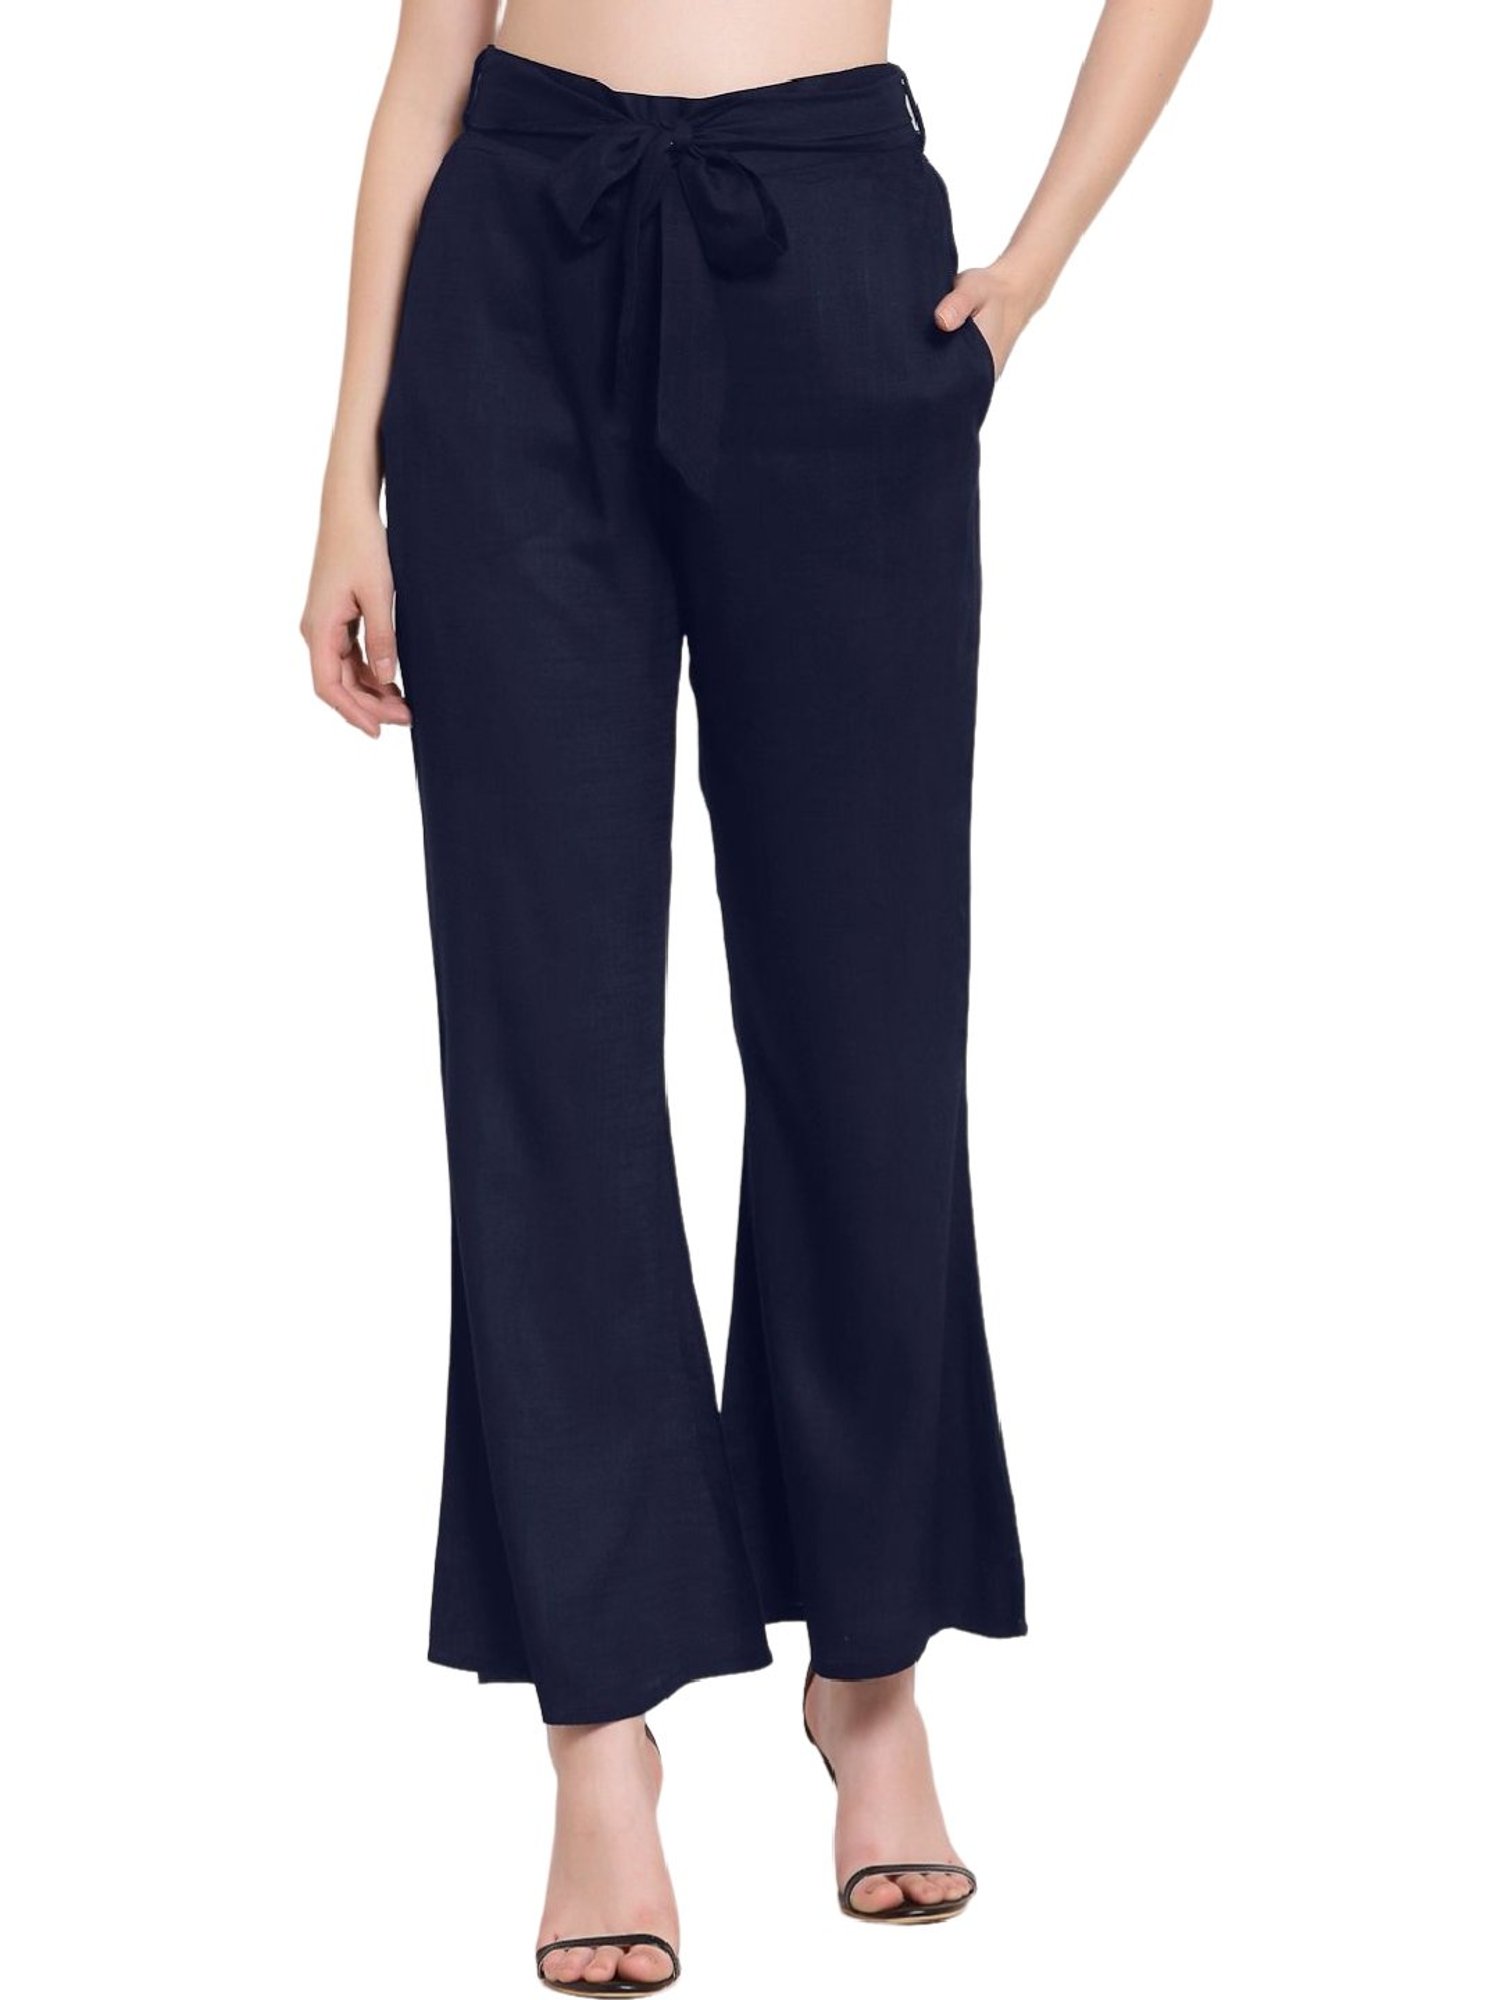 Trend Arrest Bottoms Pants and Trousers  Buy Trend Arrest Navy Bootcut Pant  Online  Nykaa Fashion